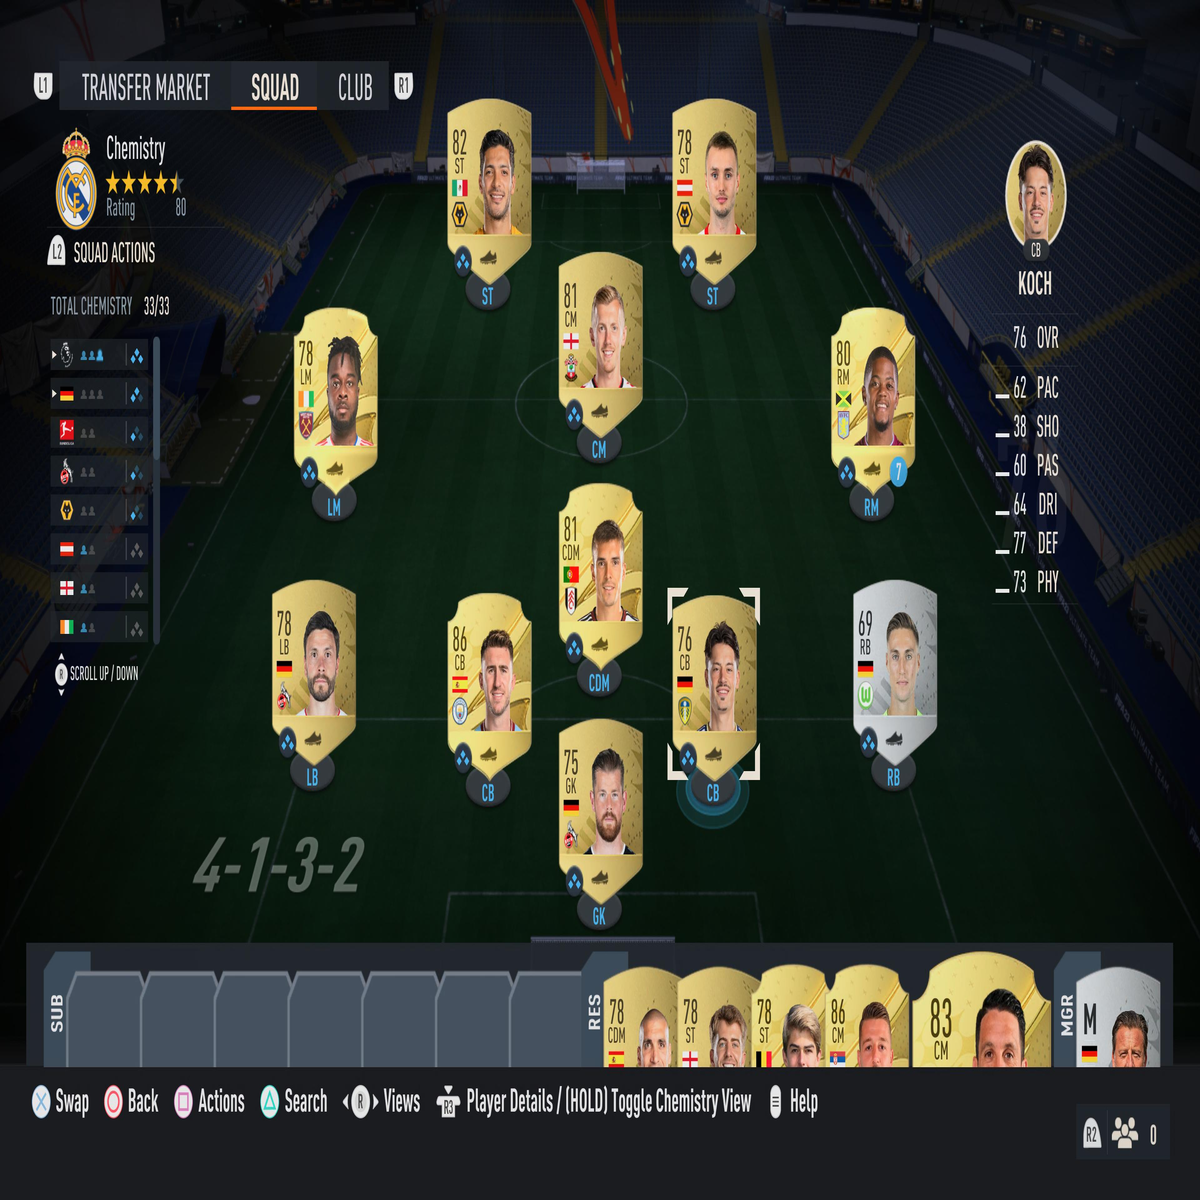 Ultimate Team Archives - Page 4 of 7 - UltimateFIFA